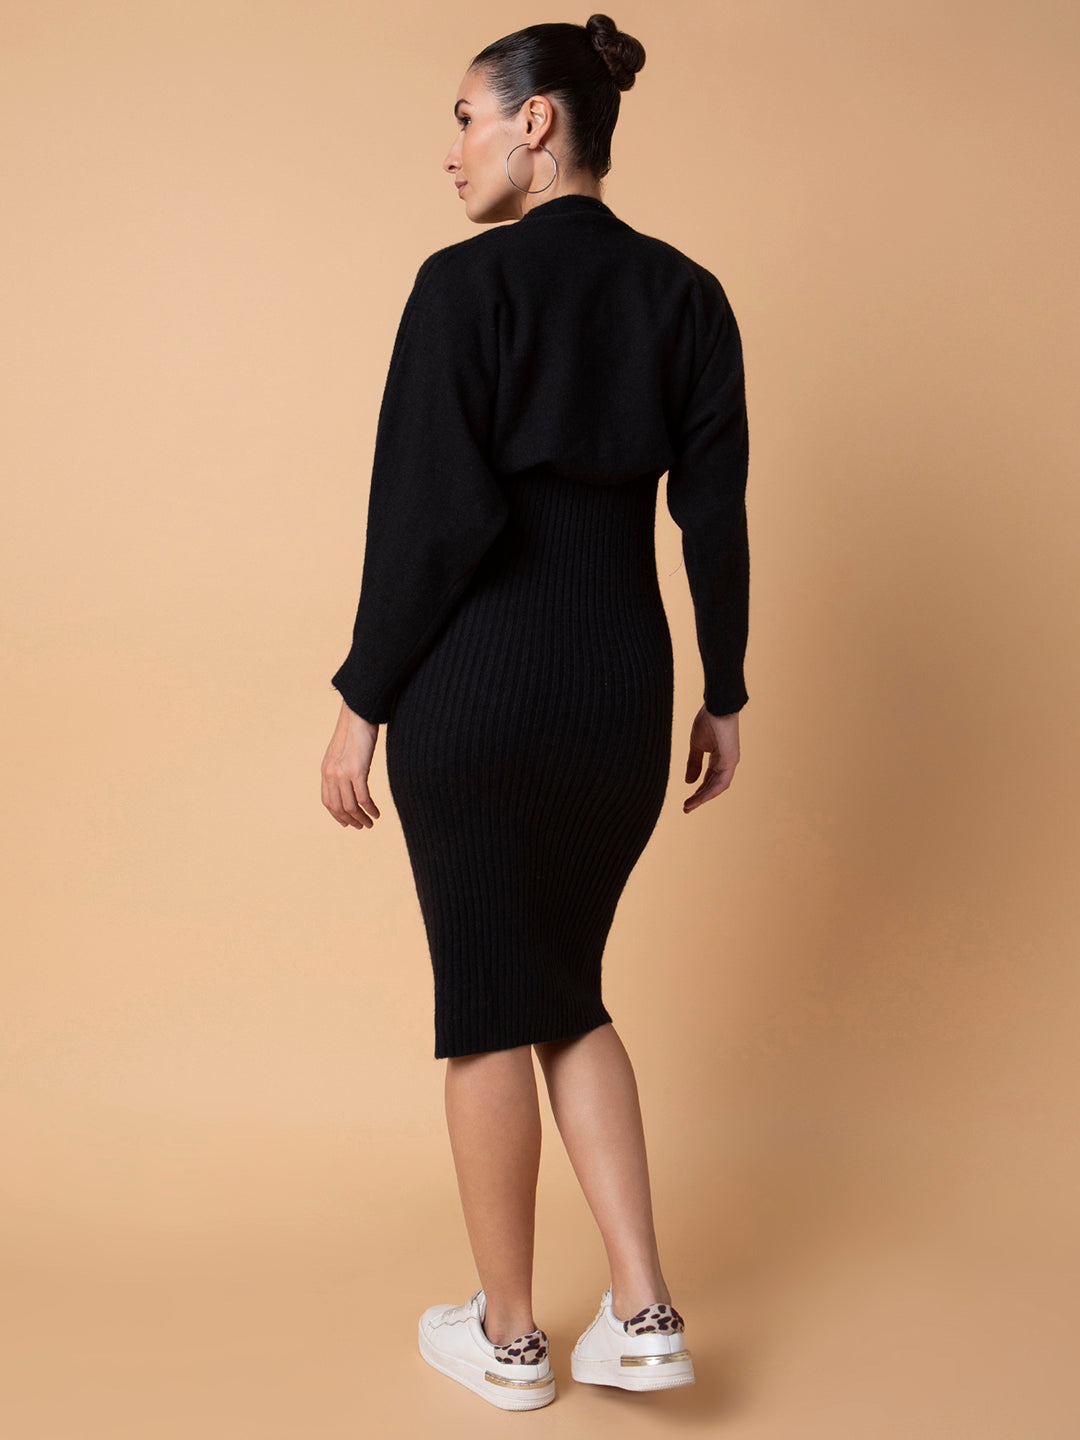 Women Solid Black Bodycon Dress with Top